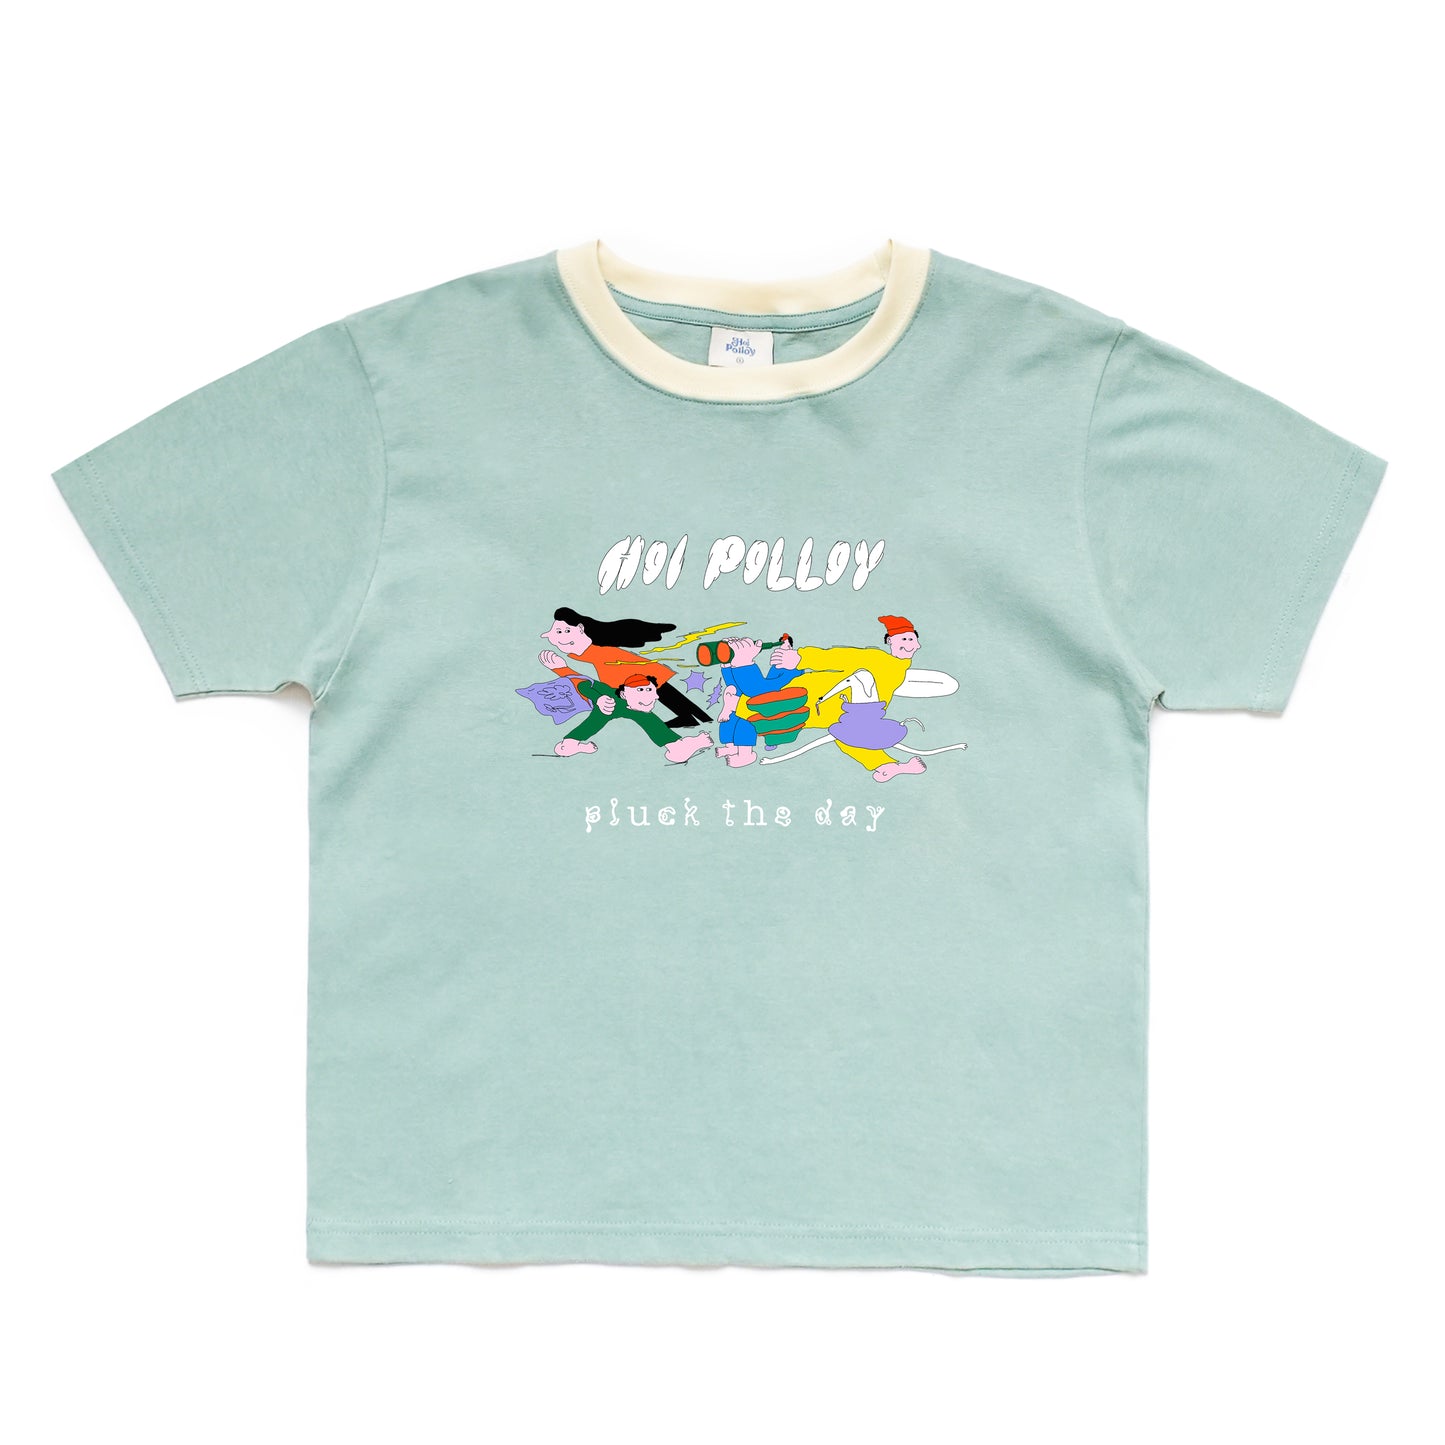 Pluck The Day Tee